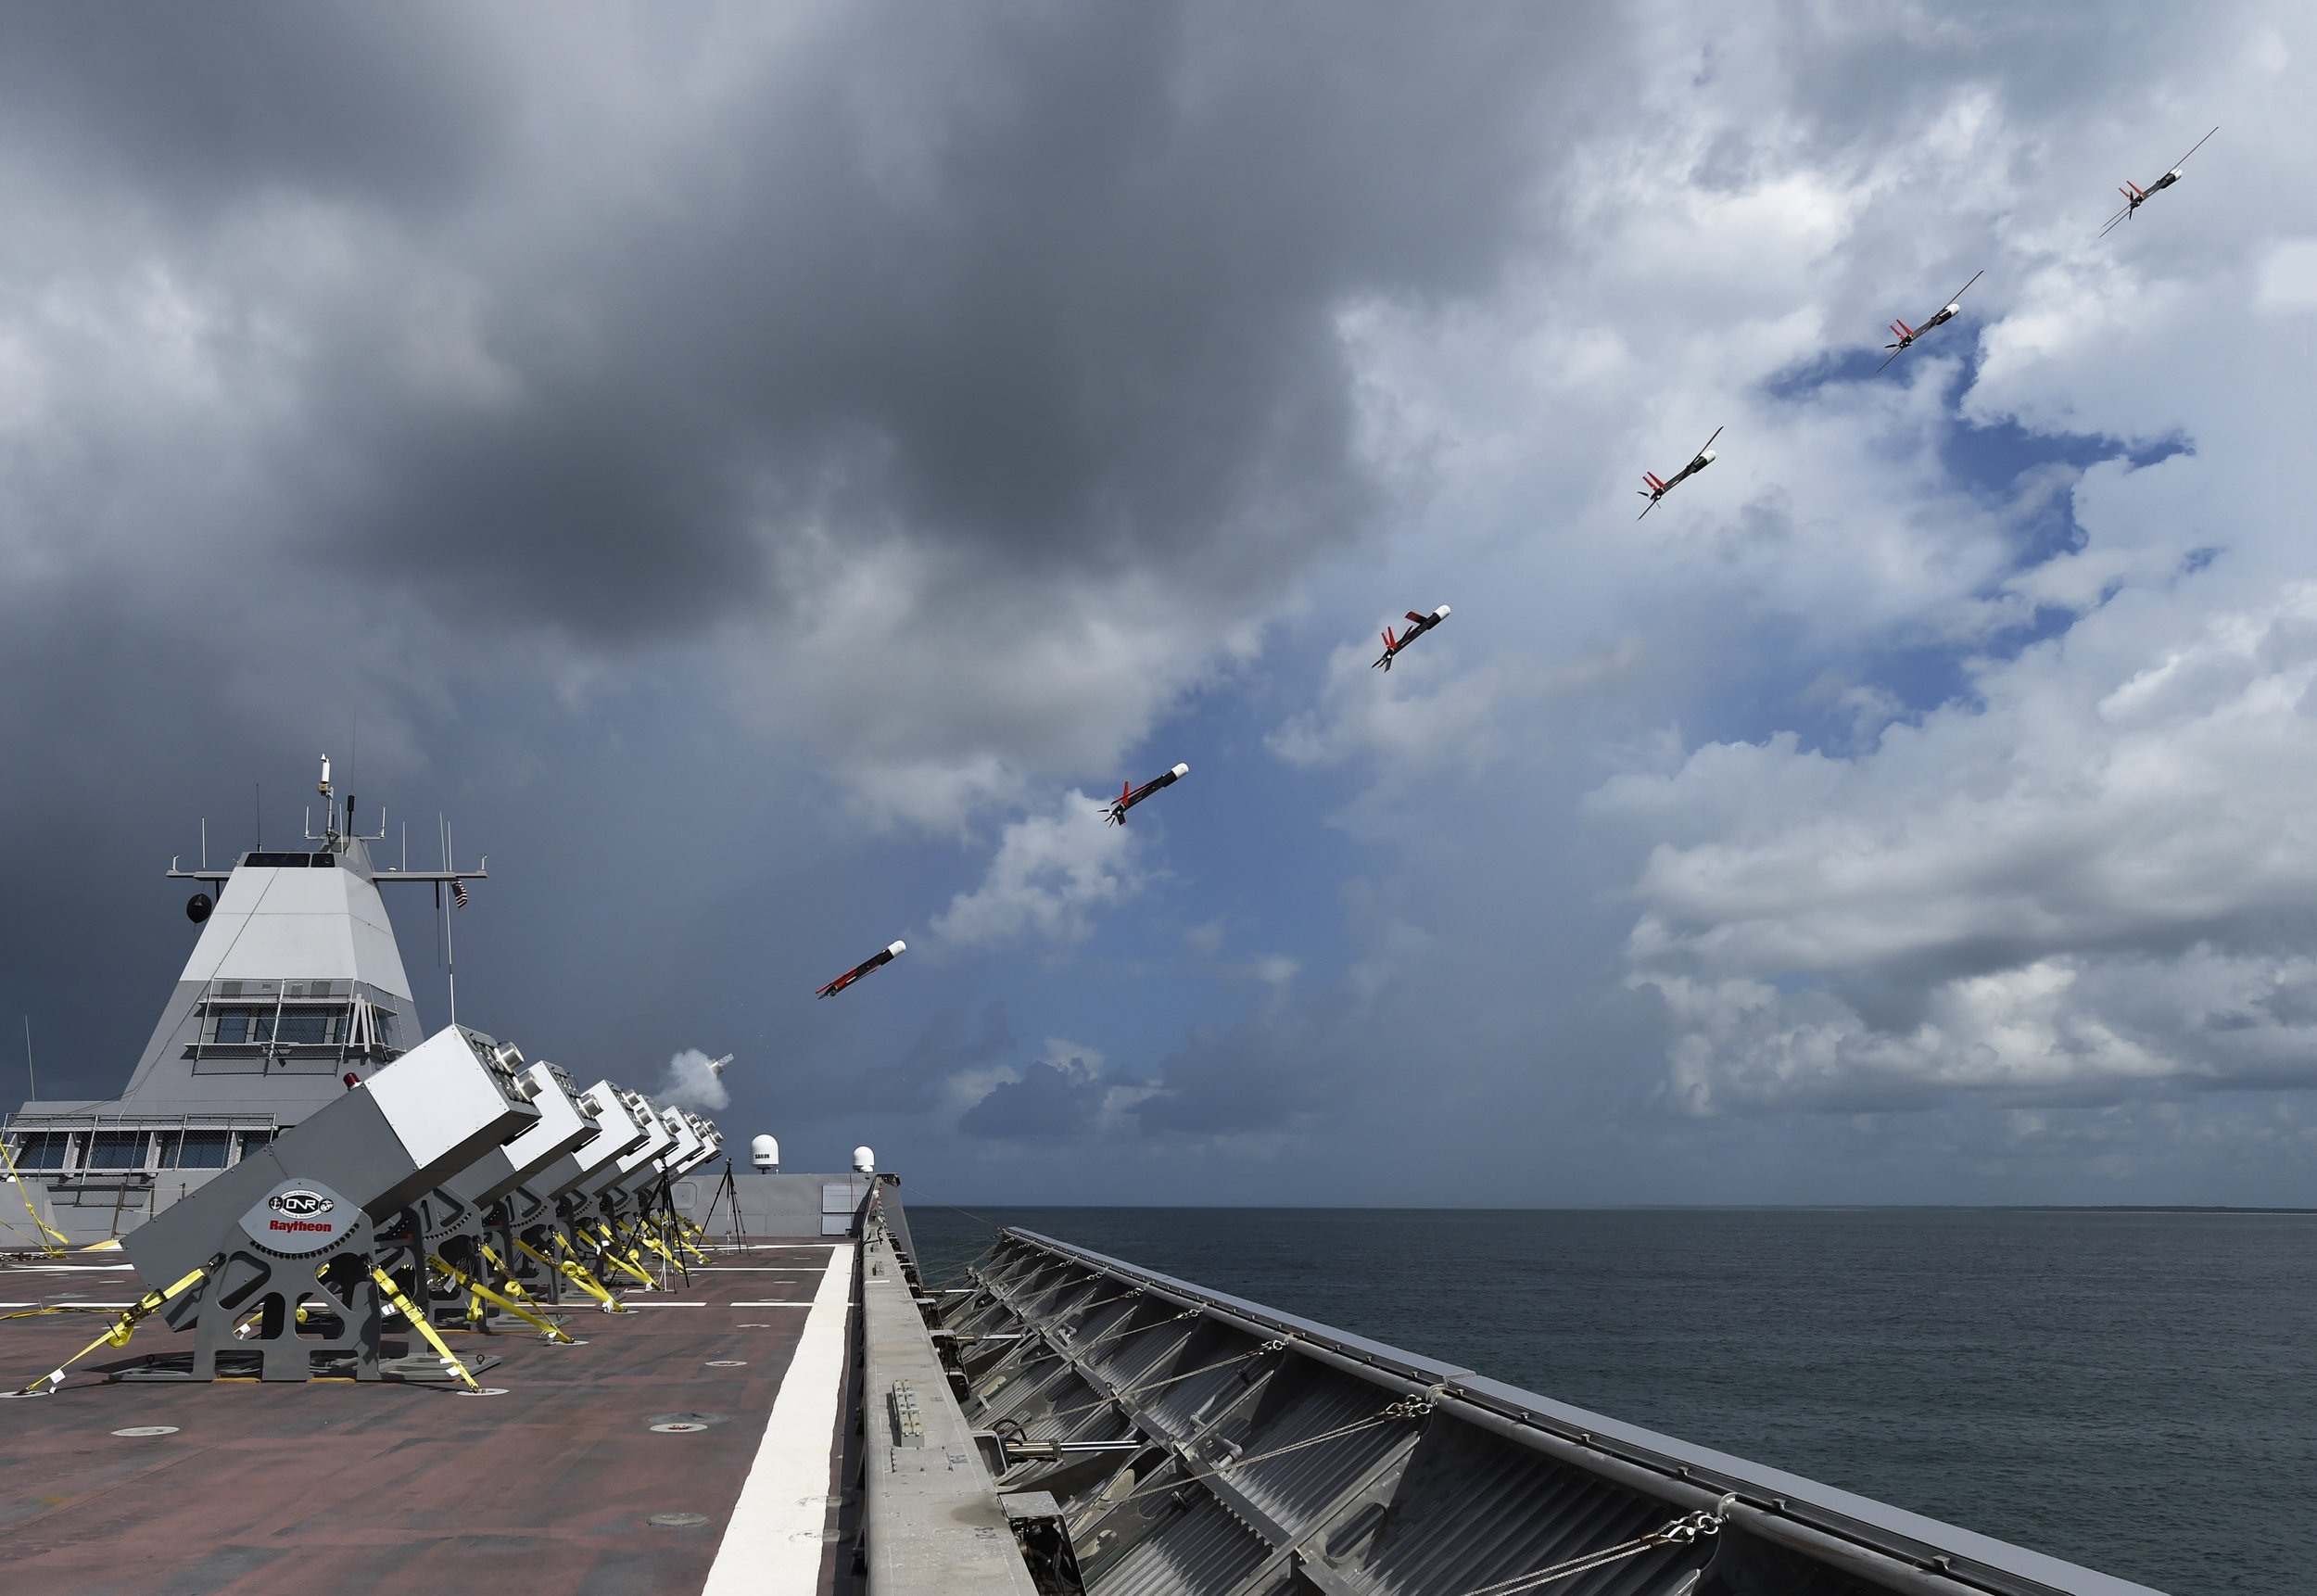  GULF OF MEXICO - A composite photograph shows Coyote unmanned air vehicles (UAVs) being launched in rapid succession from the deck of Sea Fighter (FSF 1) during an at-sea demonstration of the Office of Naval Research Low-cost UAV Swarming Technology